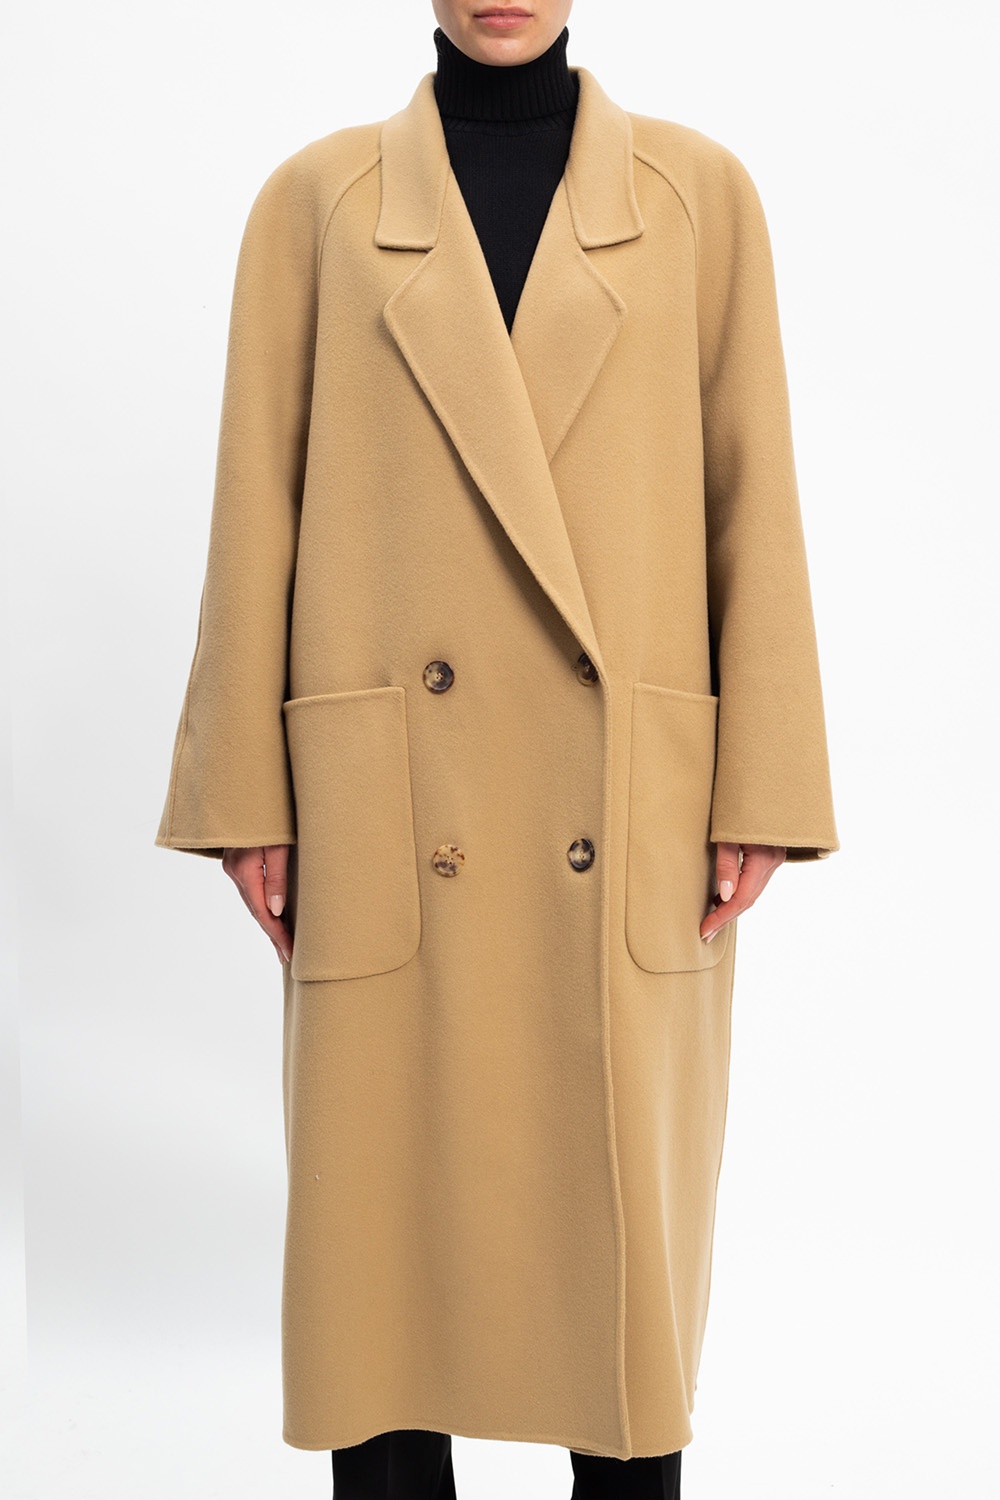 michael kors double breasted coat